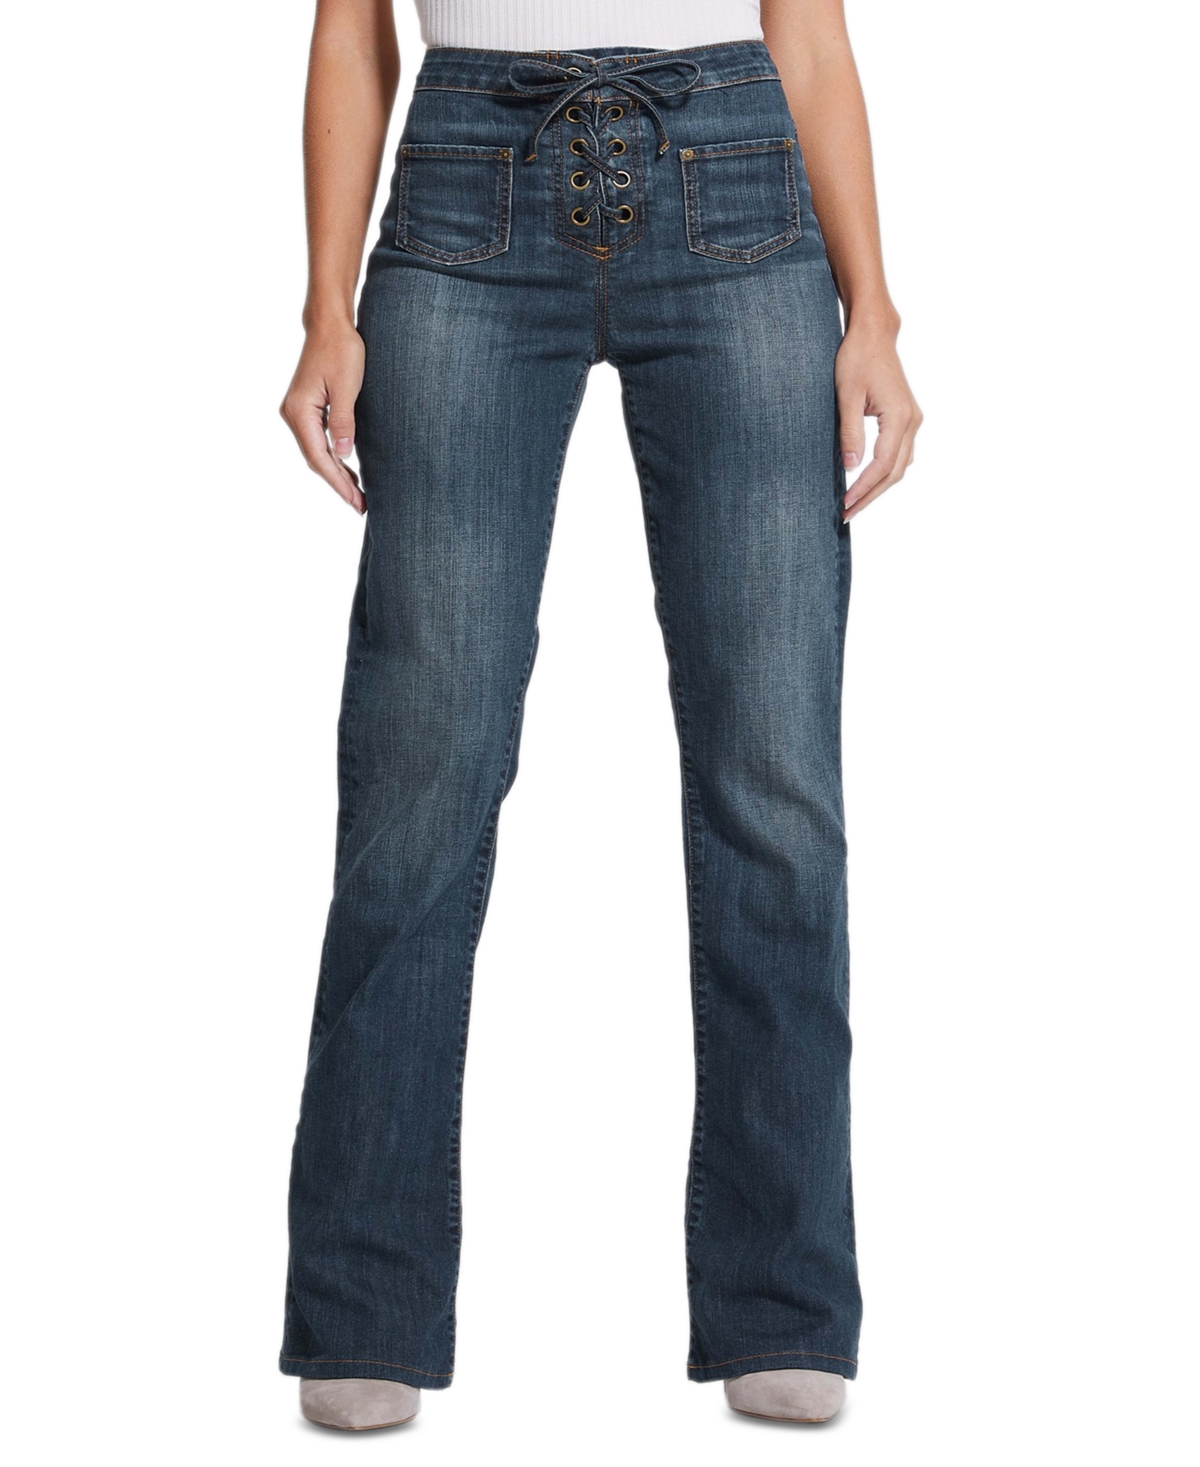 GUESS WOMEN'S HARLOW LACE-UP FLARE JEANS